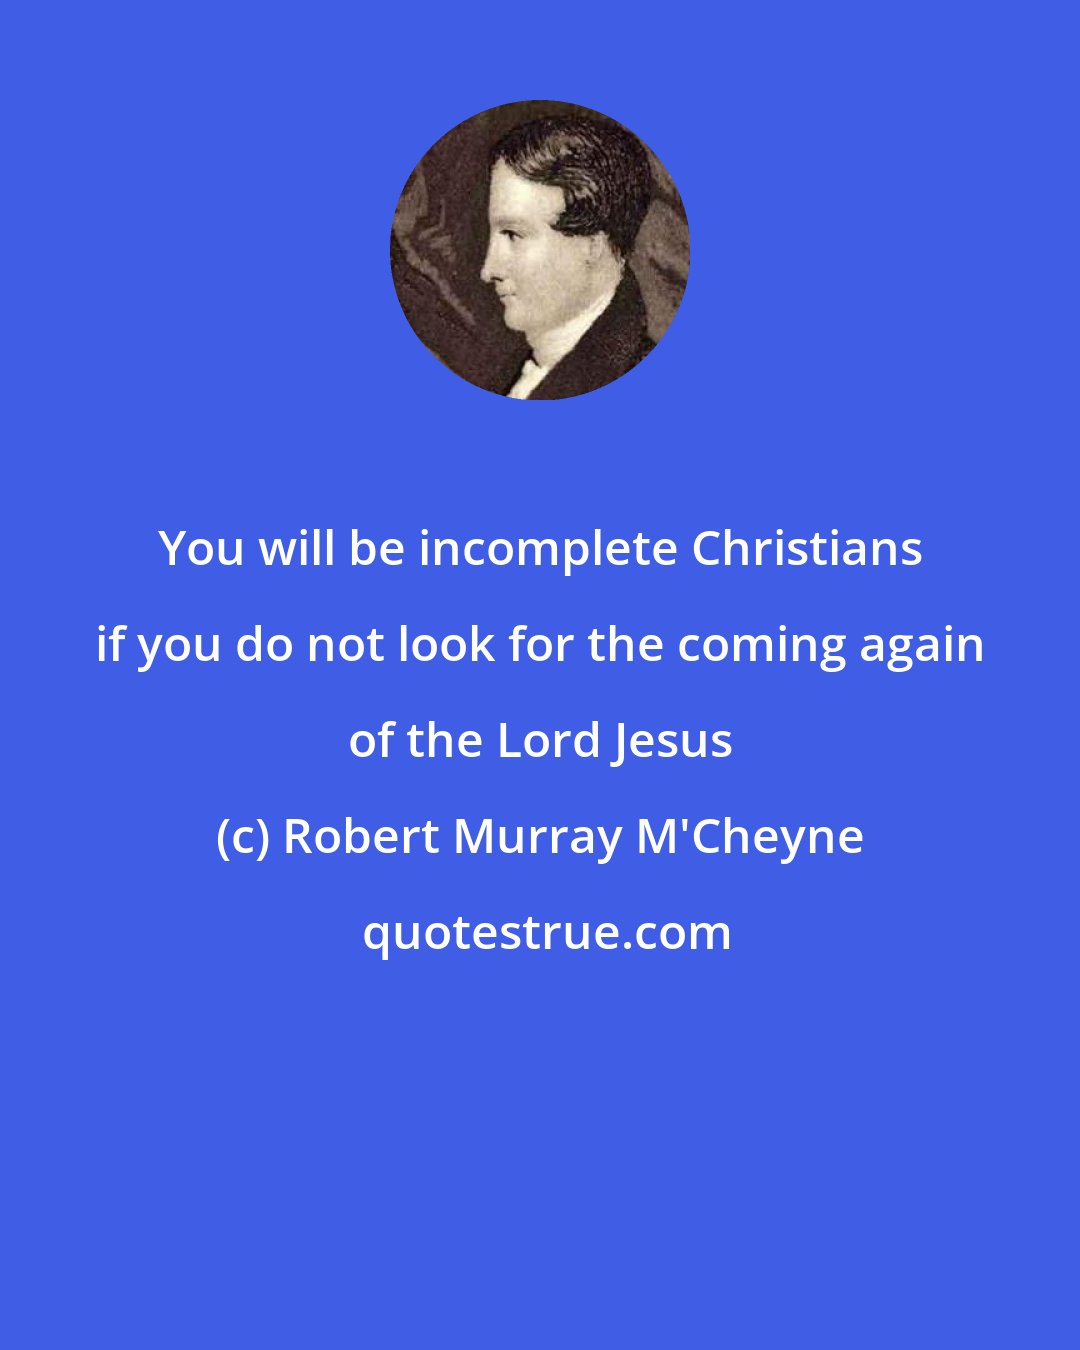 Robert Murray M'Cheyne: You will be incomplete Christians if you do not look for the coming again of the Lord Jesus